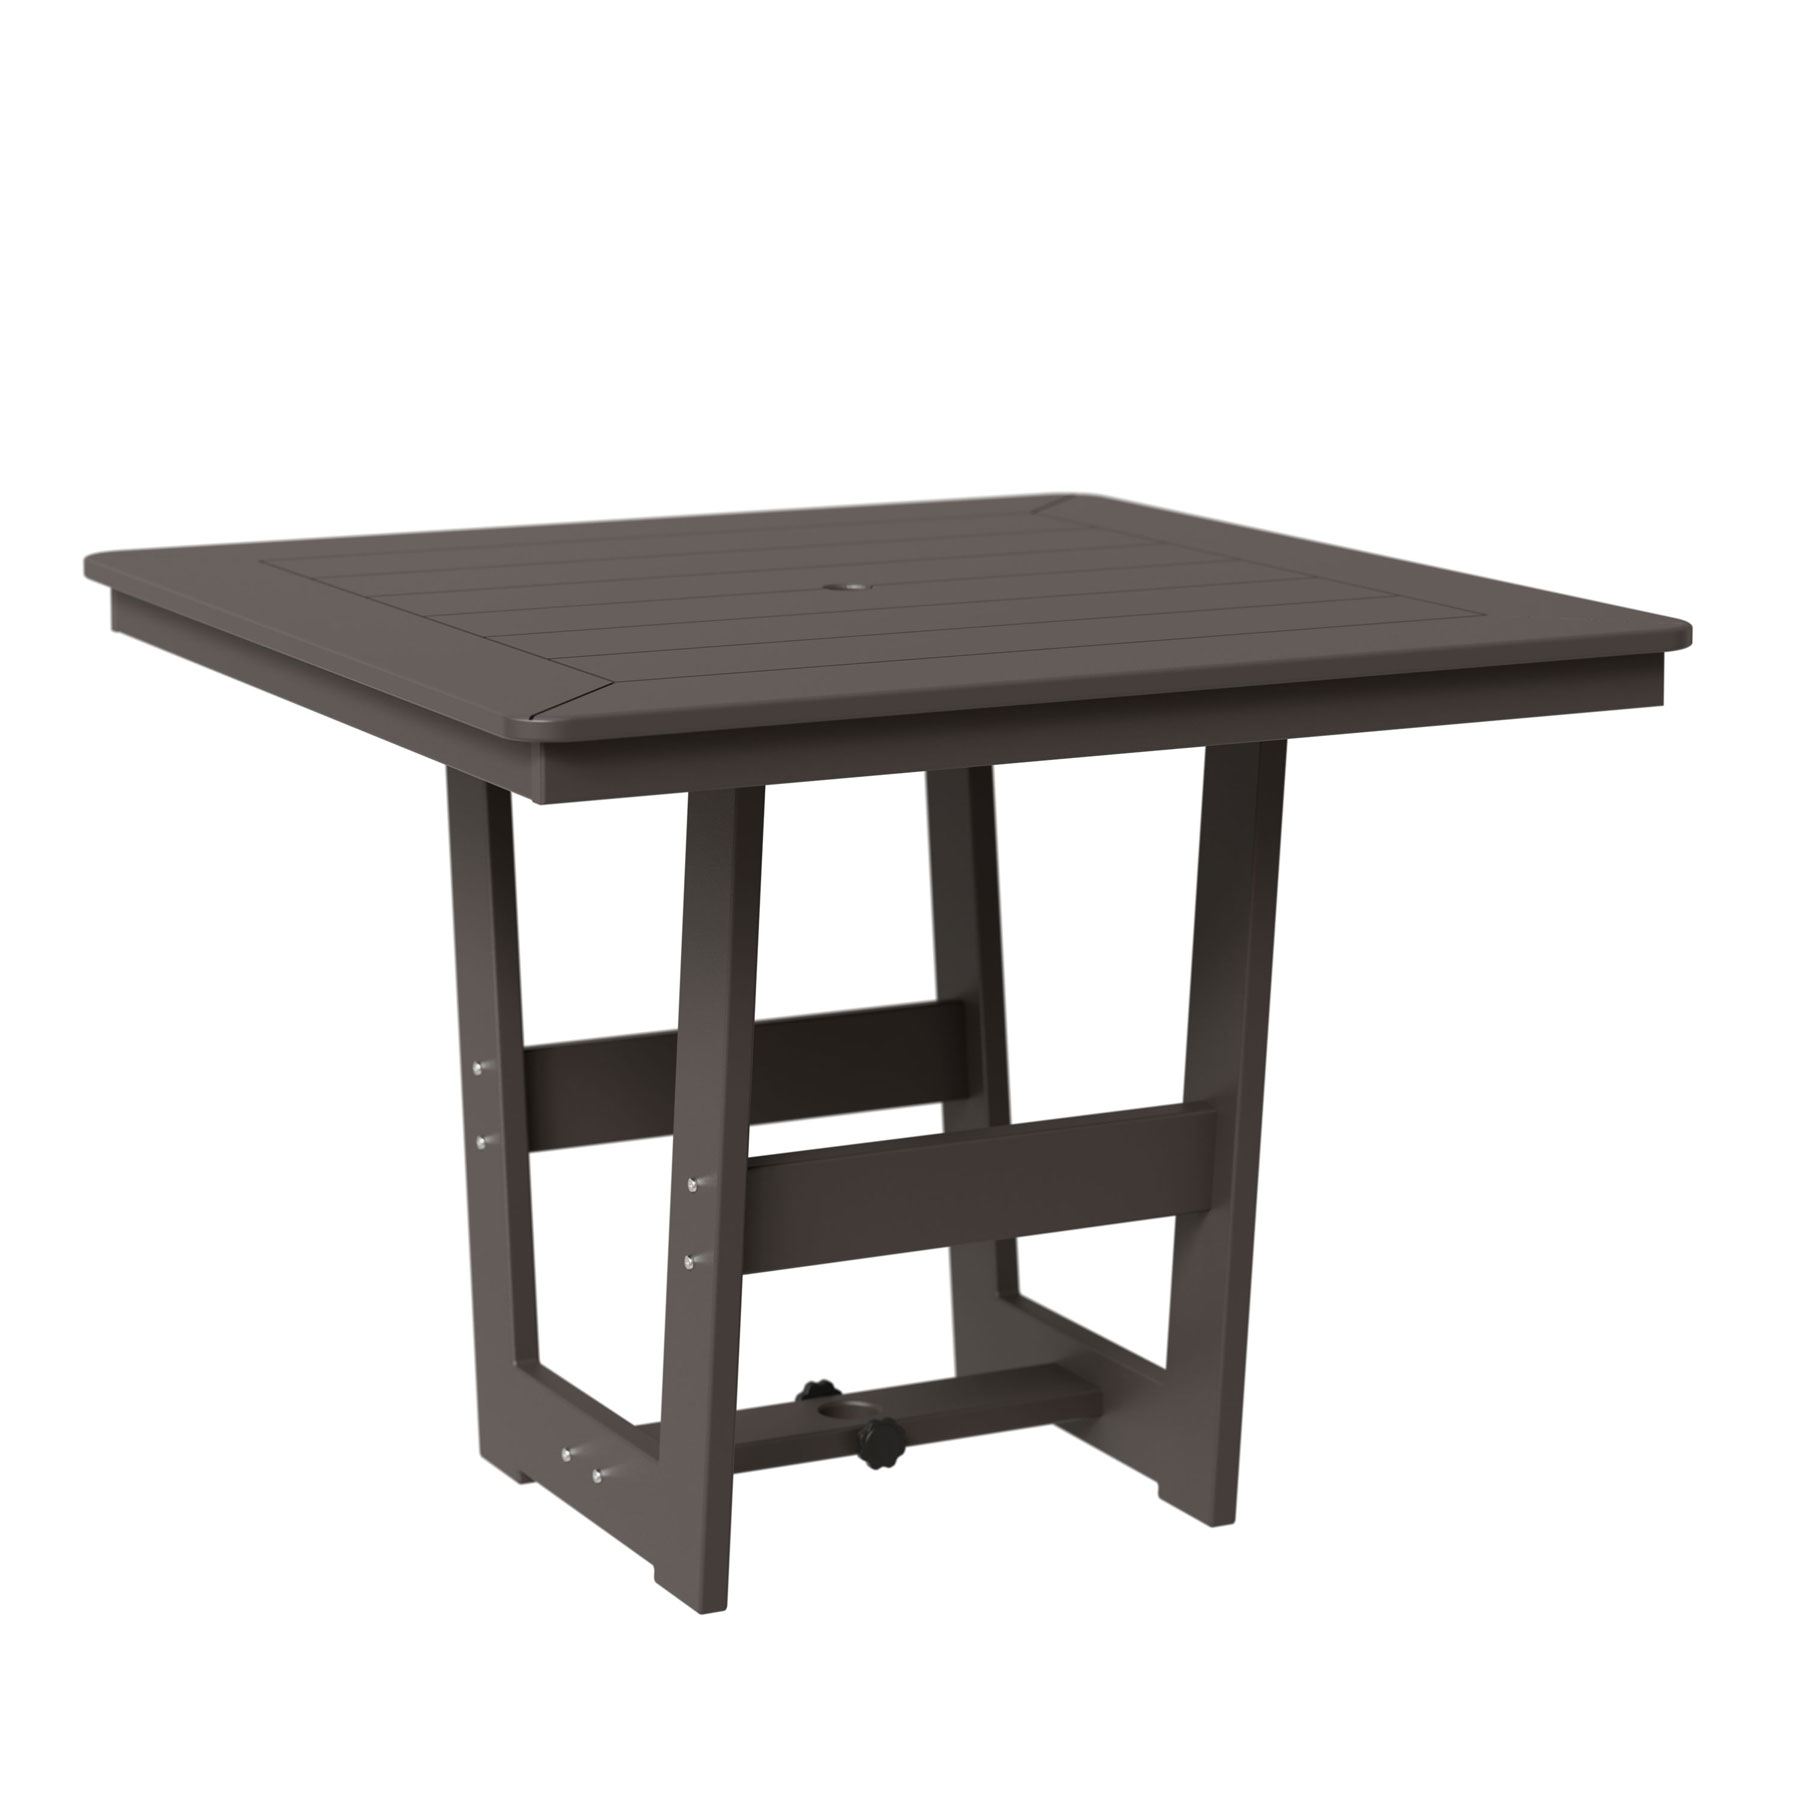 Hudson MGP 40 inch Square Dining Height Table